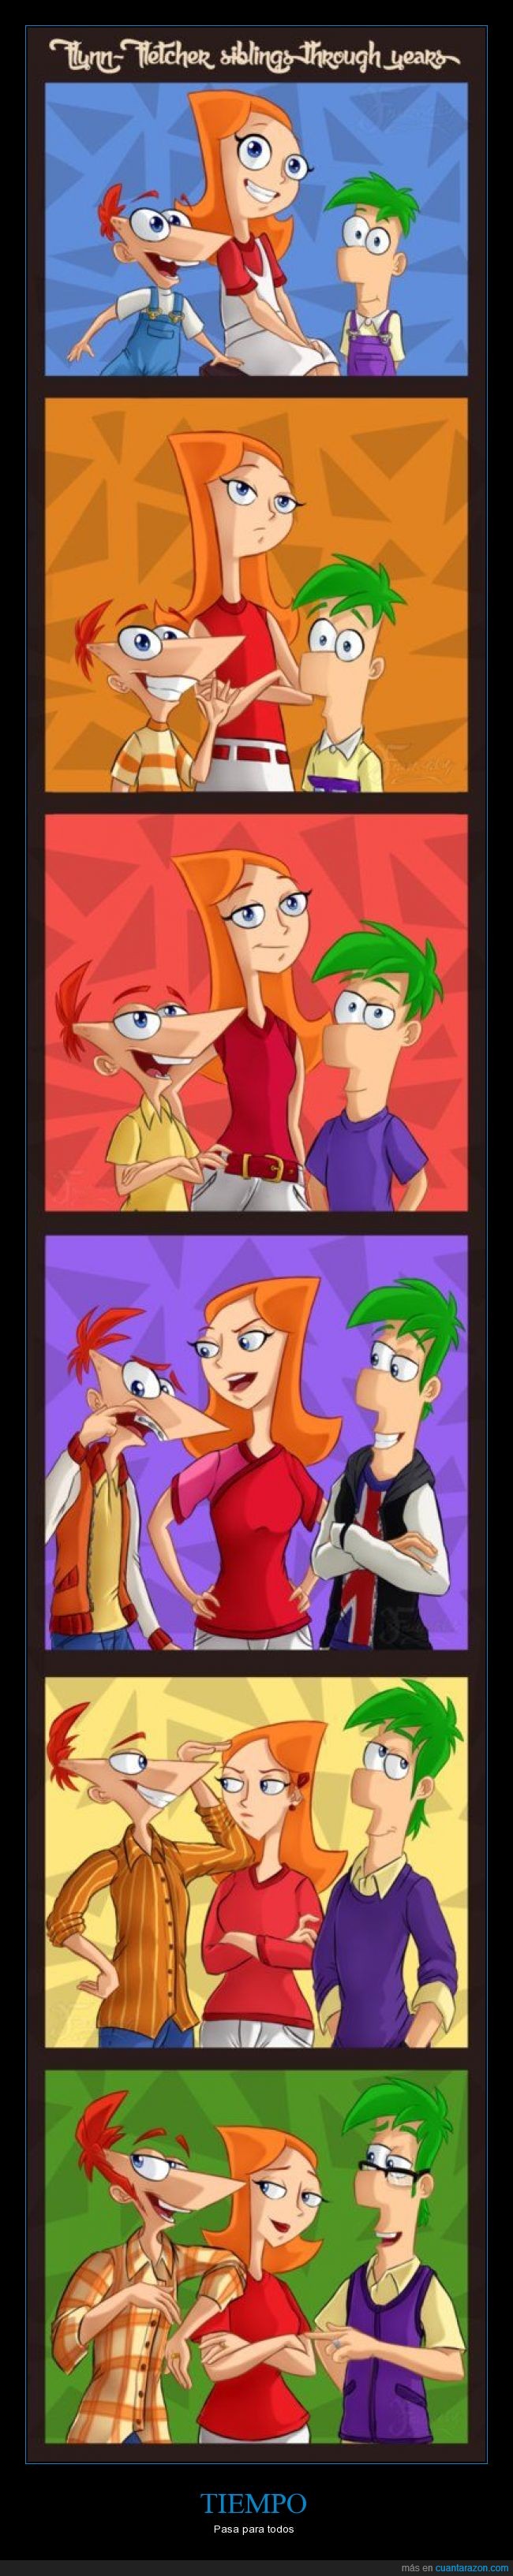 Candance,Phineas,Ferb,Tiempo,mayores,crecer,evolucion,phineas y ferb